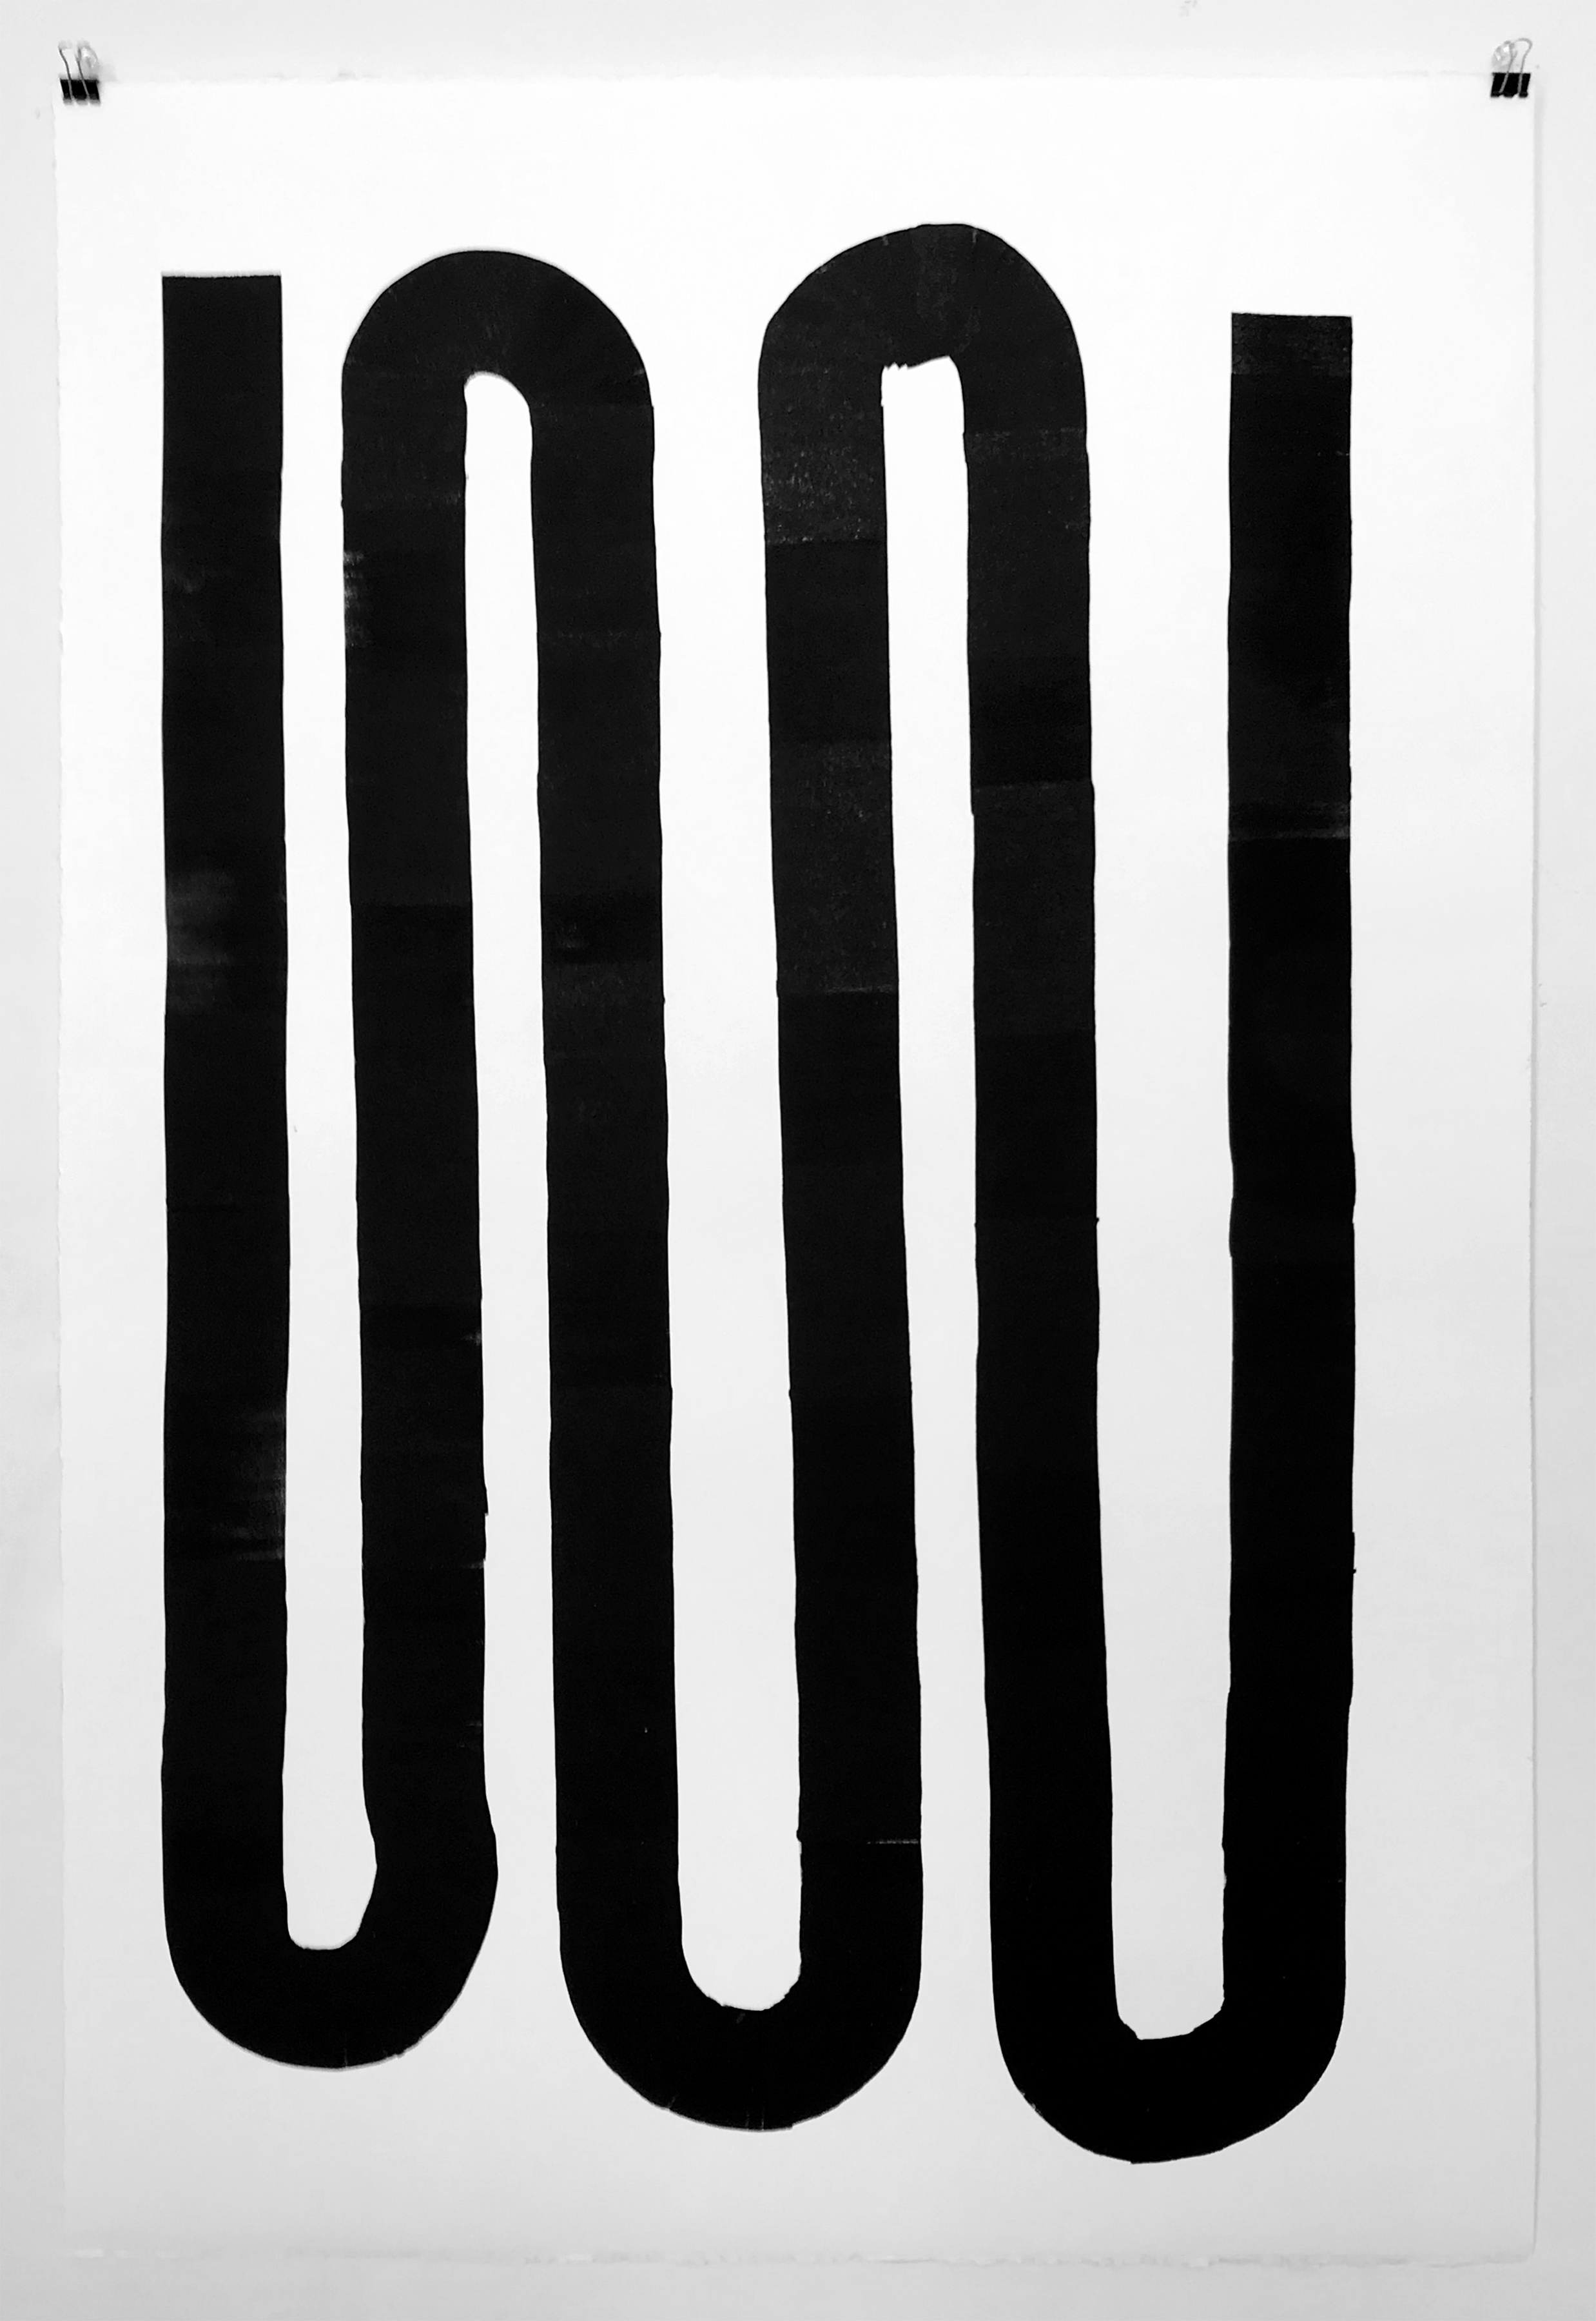  Radiator, 2019, Litho ink on paper, 44 x 30 inches (unframed) 